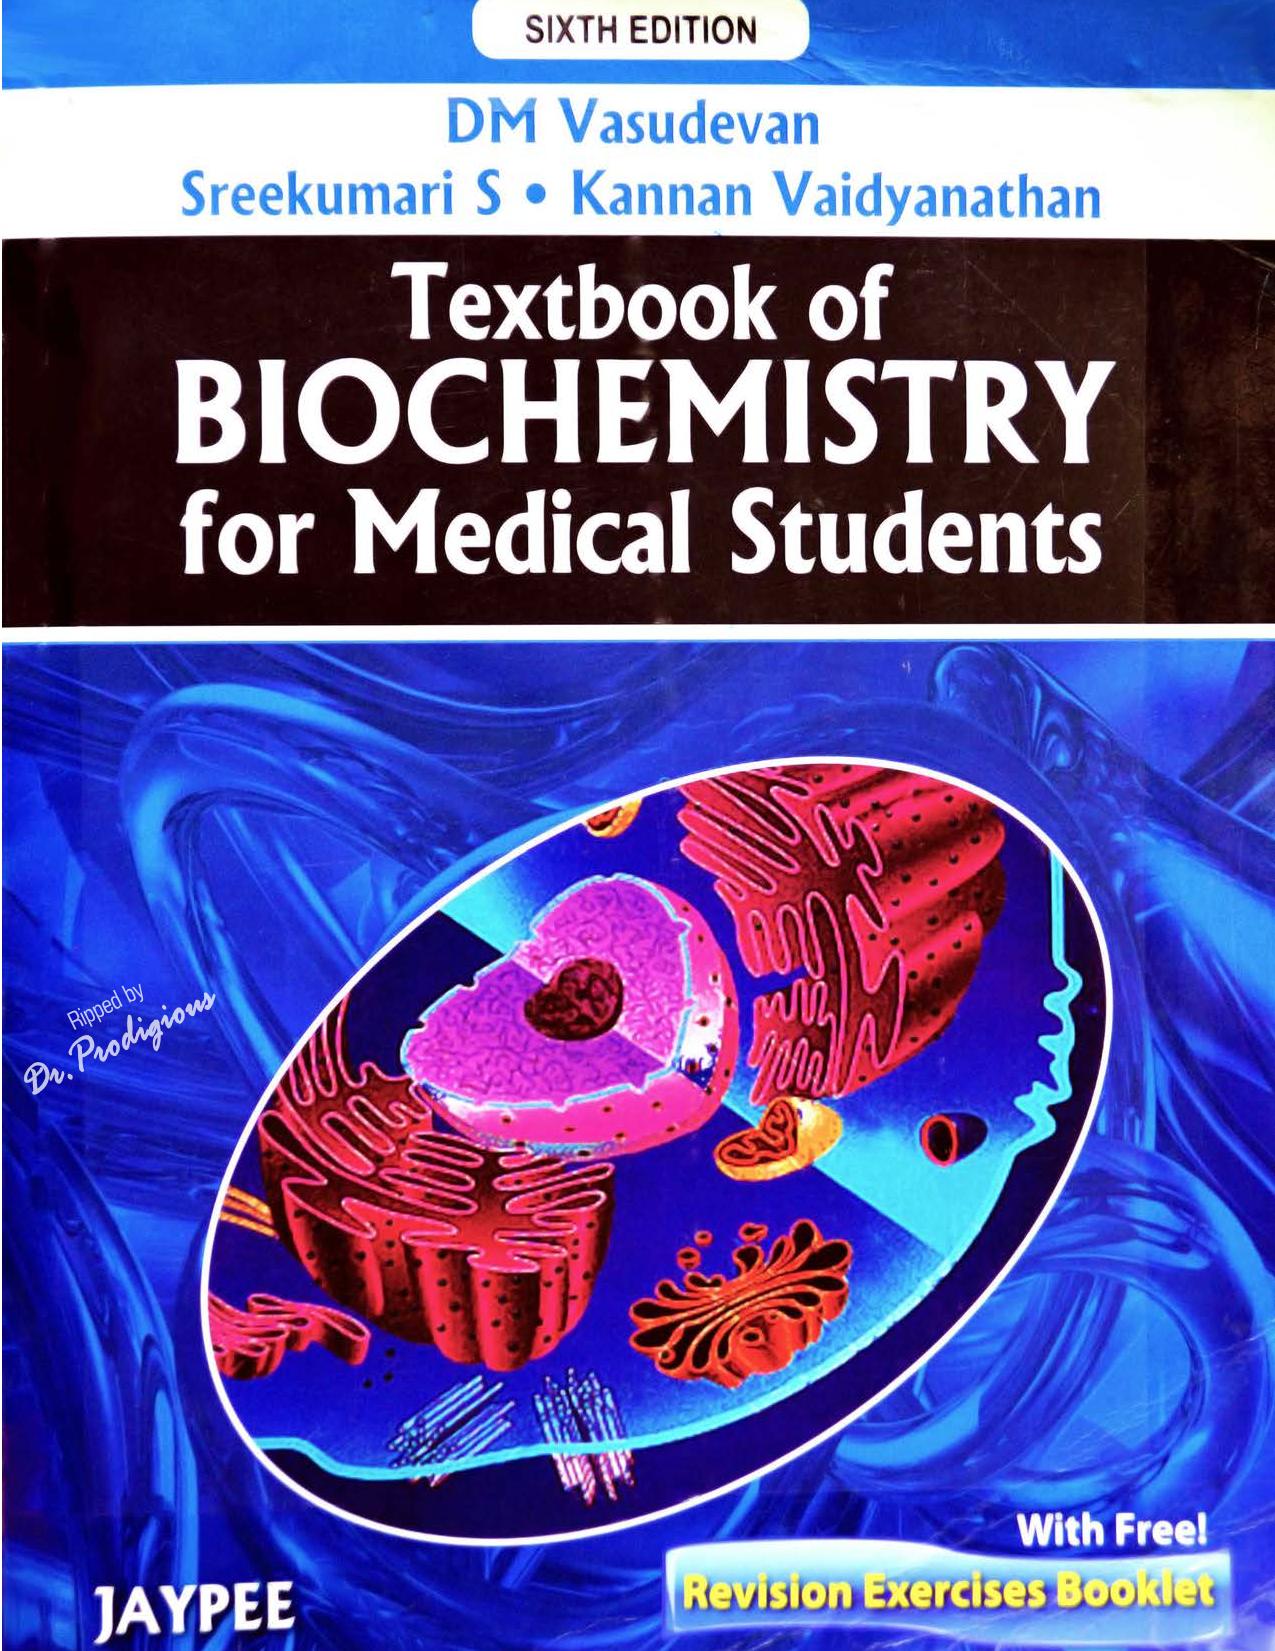 Textbook of Biochemistry - For Medical Students, 6th Edition